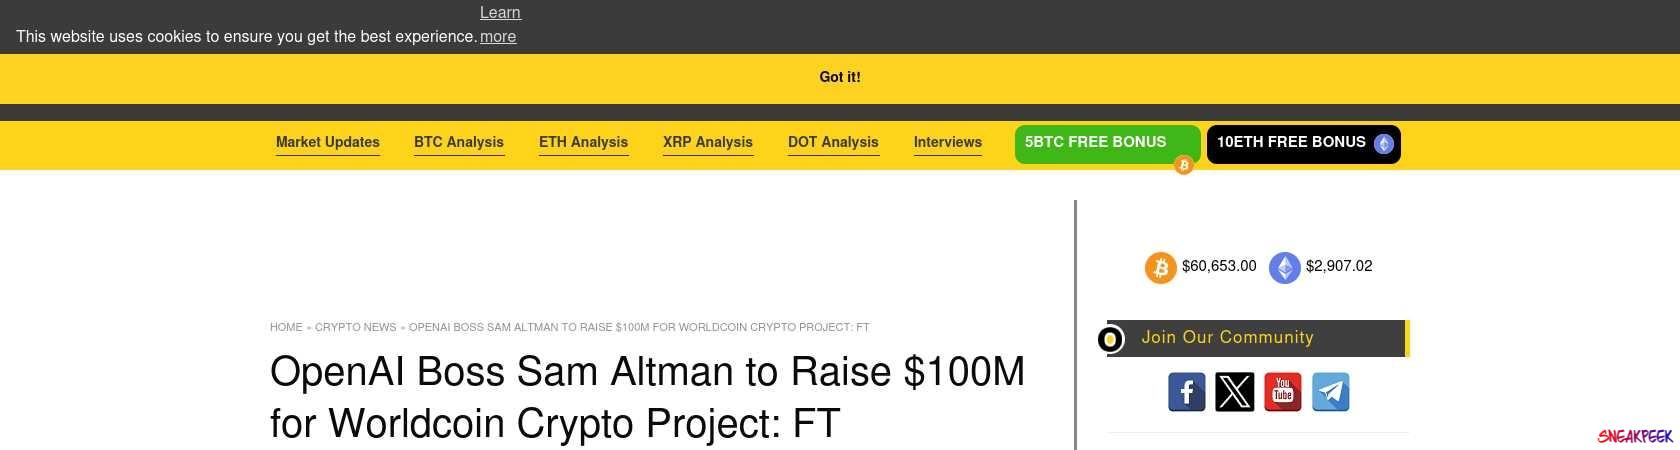 Read the full Article:  ⭲ OpenAI Boss Sam Altman to Raise $100M for Worldcoin Crypto Project: FT